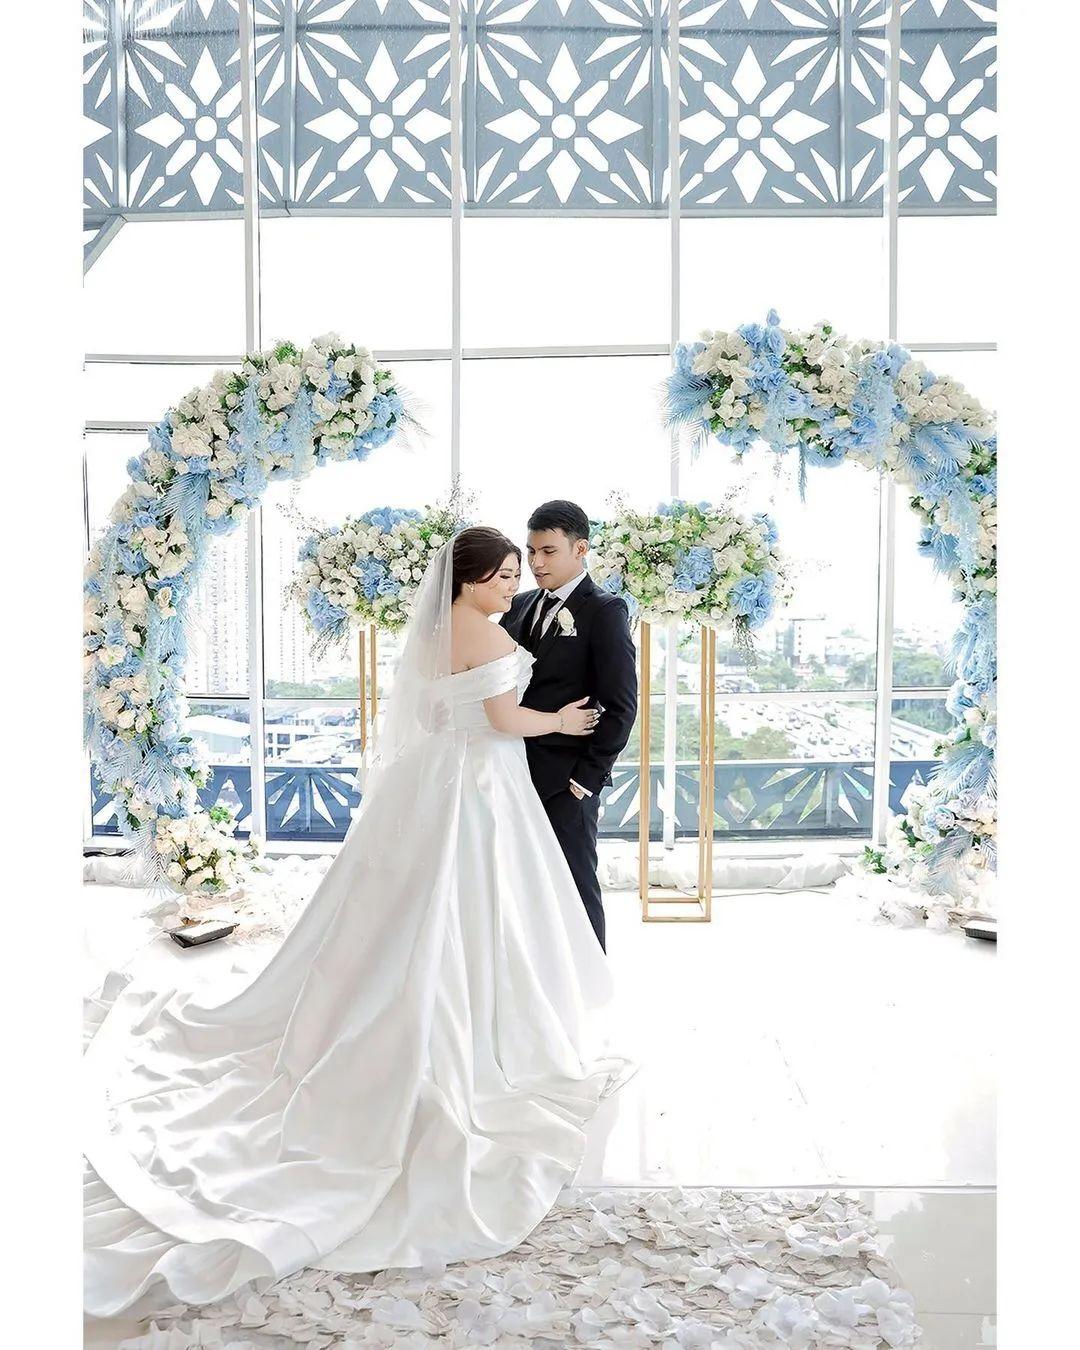 class="content__text"
 The Wedding of Irfan &amp; Wilma ❤️

Photographed by @appphotography.id@app.hananlutfi &amp; @j_tjia7 
Photo edited by @afyannoer 
Team of @ariespangestu 
Brushed @marli_makeup 
Gown @kyriawedding.id 
Suit @sasdesigns 
Decoration @dimensi.decoration 
Venue @verandahotels@estare_thevidaballroom 
Organized @premiere_wo